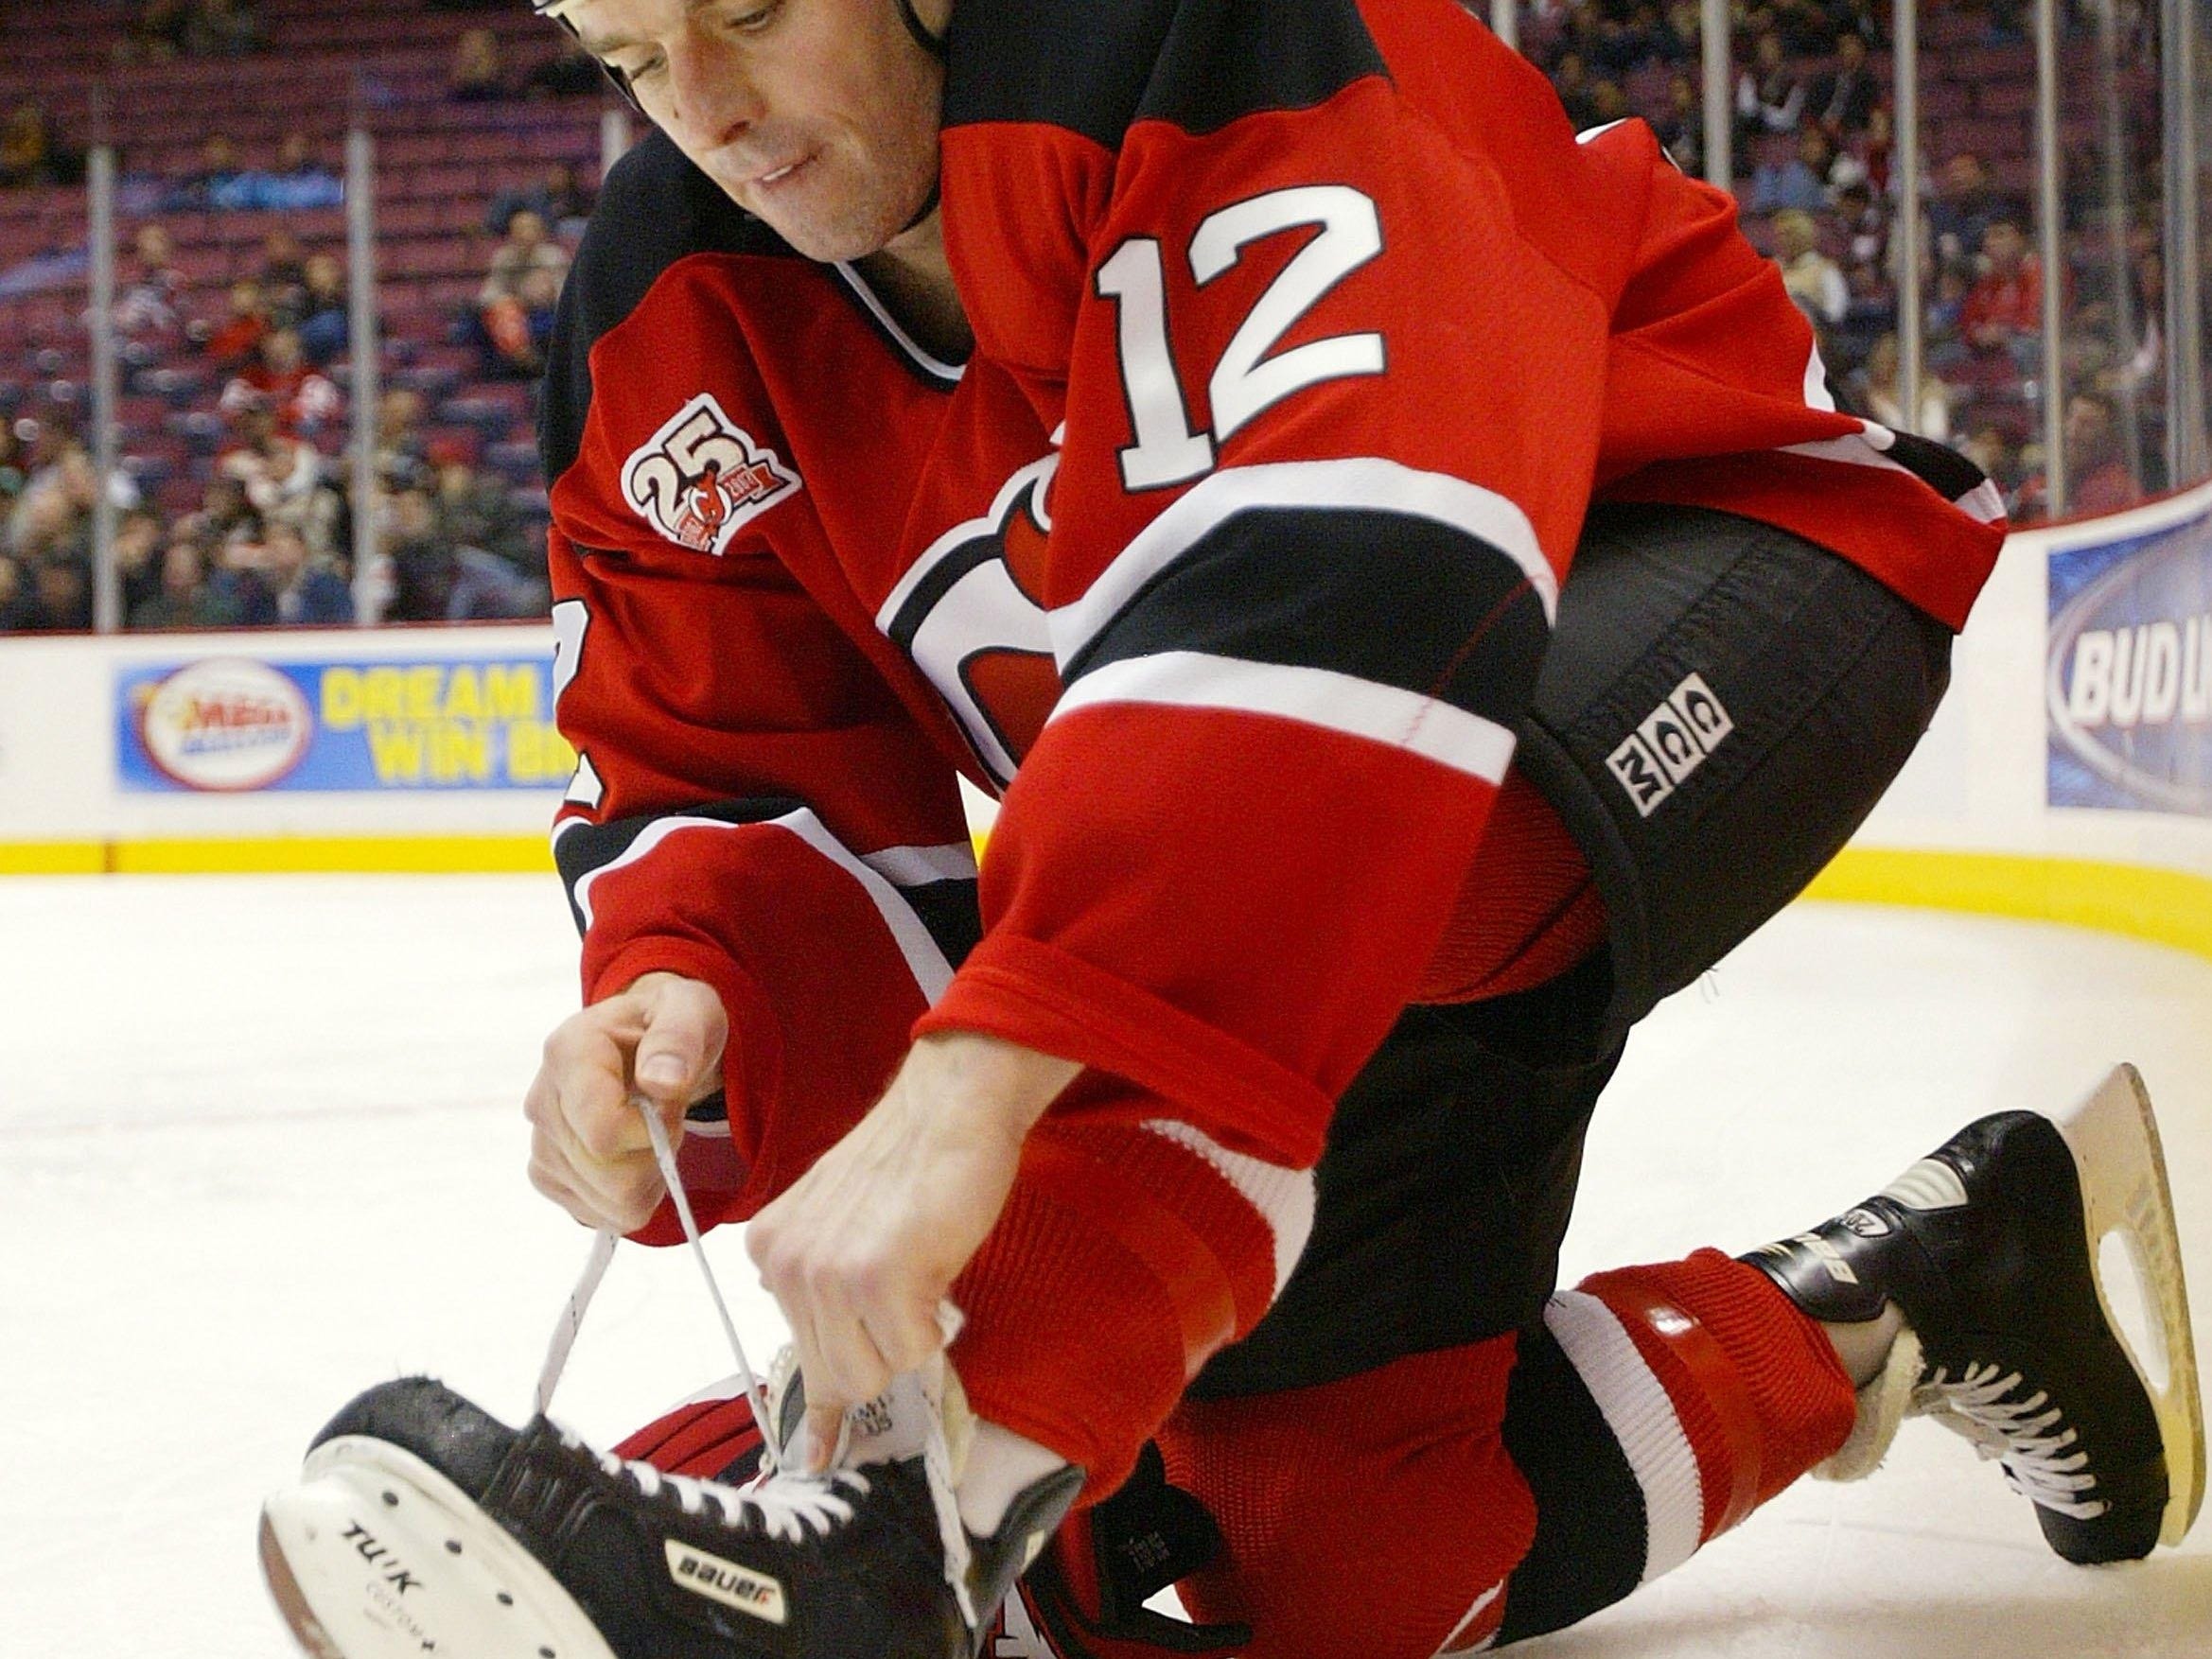 Jim Dowd ties his skate during a 2006 Devils game against the Montreal Canadiens.